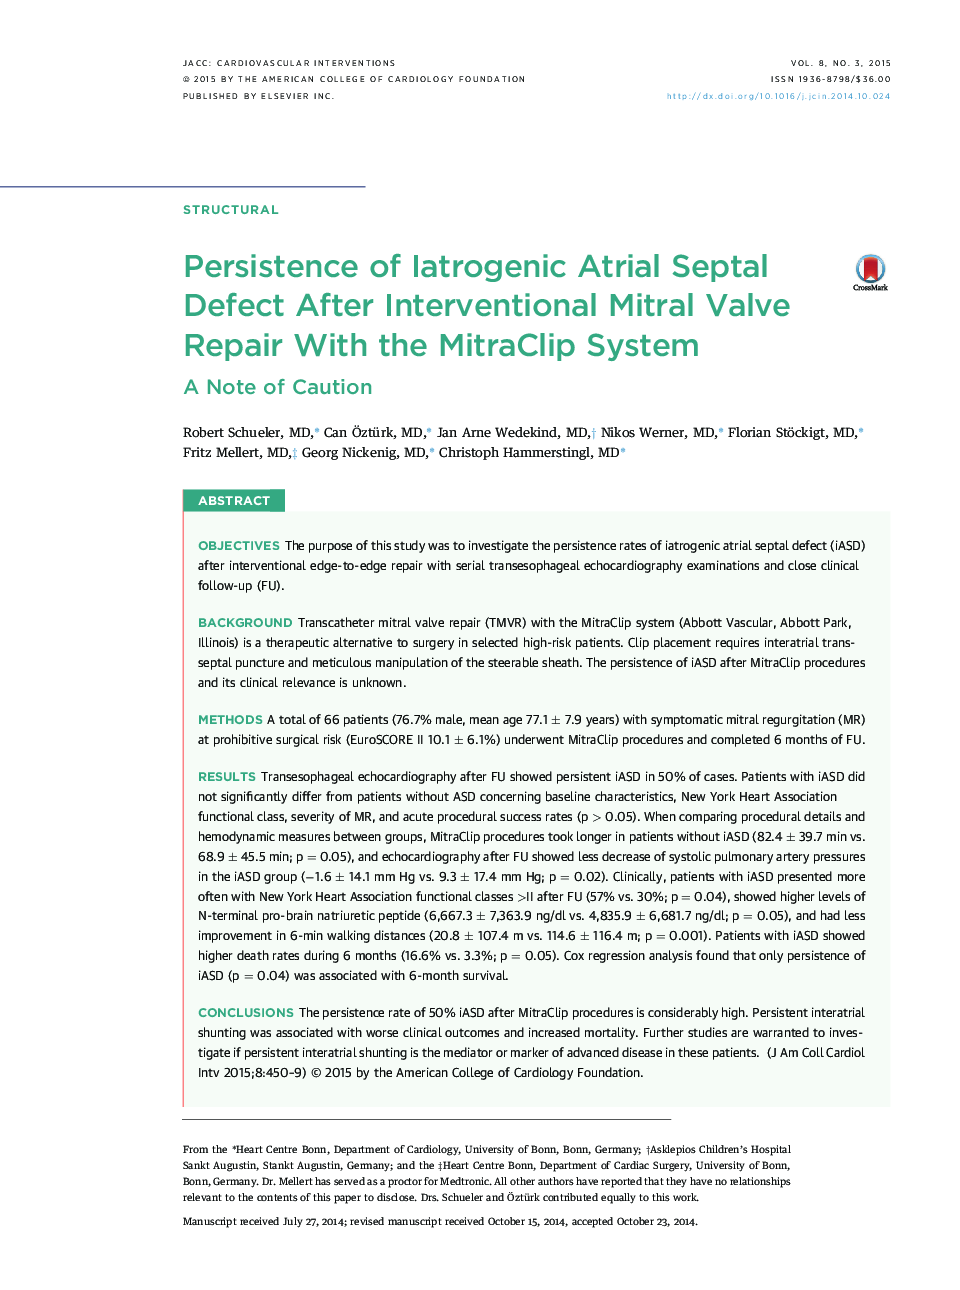 Persistence of Iatrogenic Atrial Septal Defect After Interventional Mitral Valve Repair With the MitraClip System: A Note of Caution